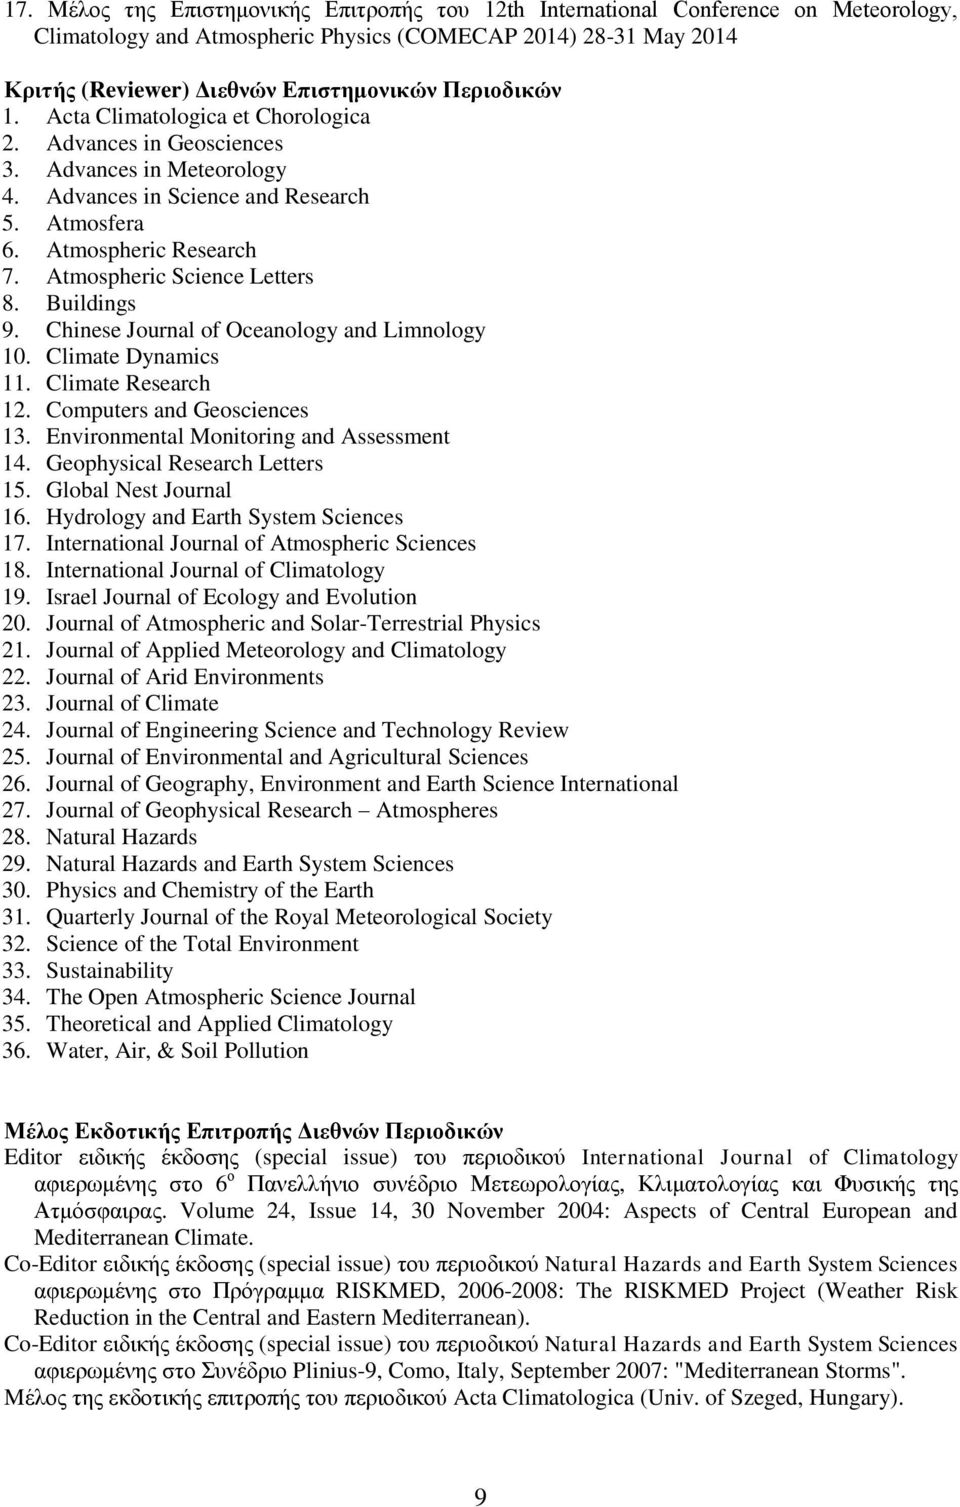 Atmospheric Science Letters 8. Buildings 9. Chinese Journal of Oceanology and Limnology 10. Climate Dynamics 11. Climate Research 12. Computers and Geosciences 13.